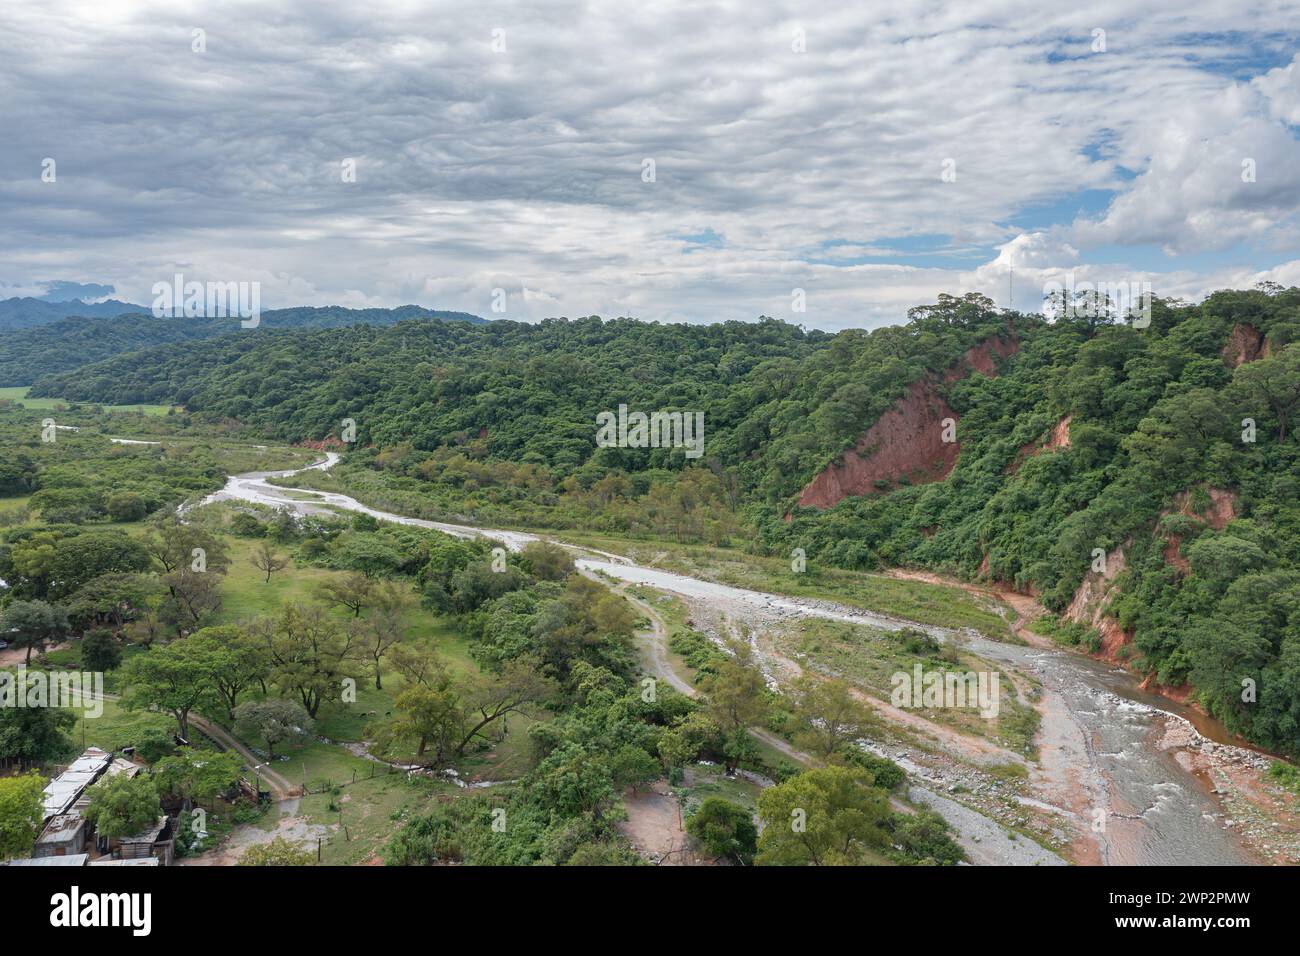 Aerial view of the Conchas River in Metan province of Salta Argentina. Stock Photo